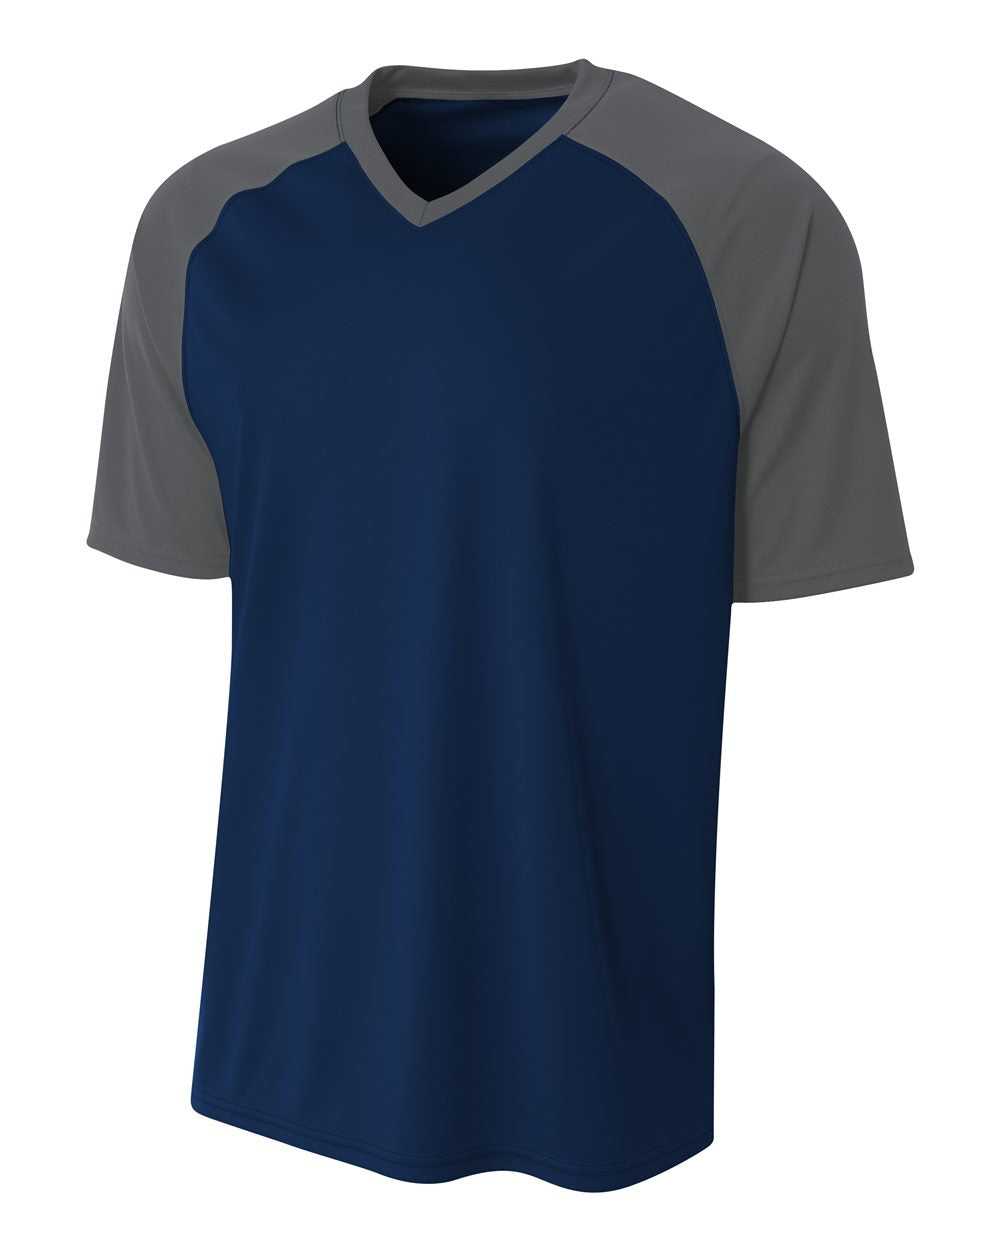 A4 N3373 Strike Jersey - Navy Graphite - HIT a Double